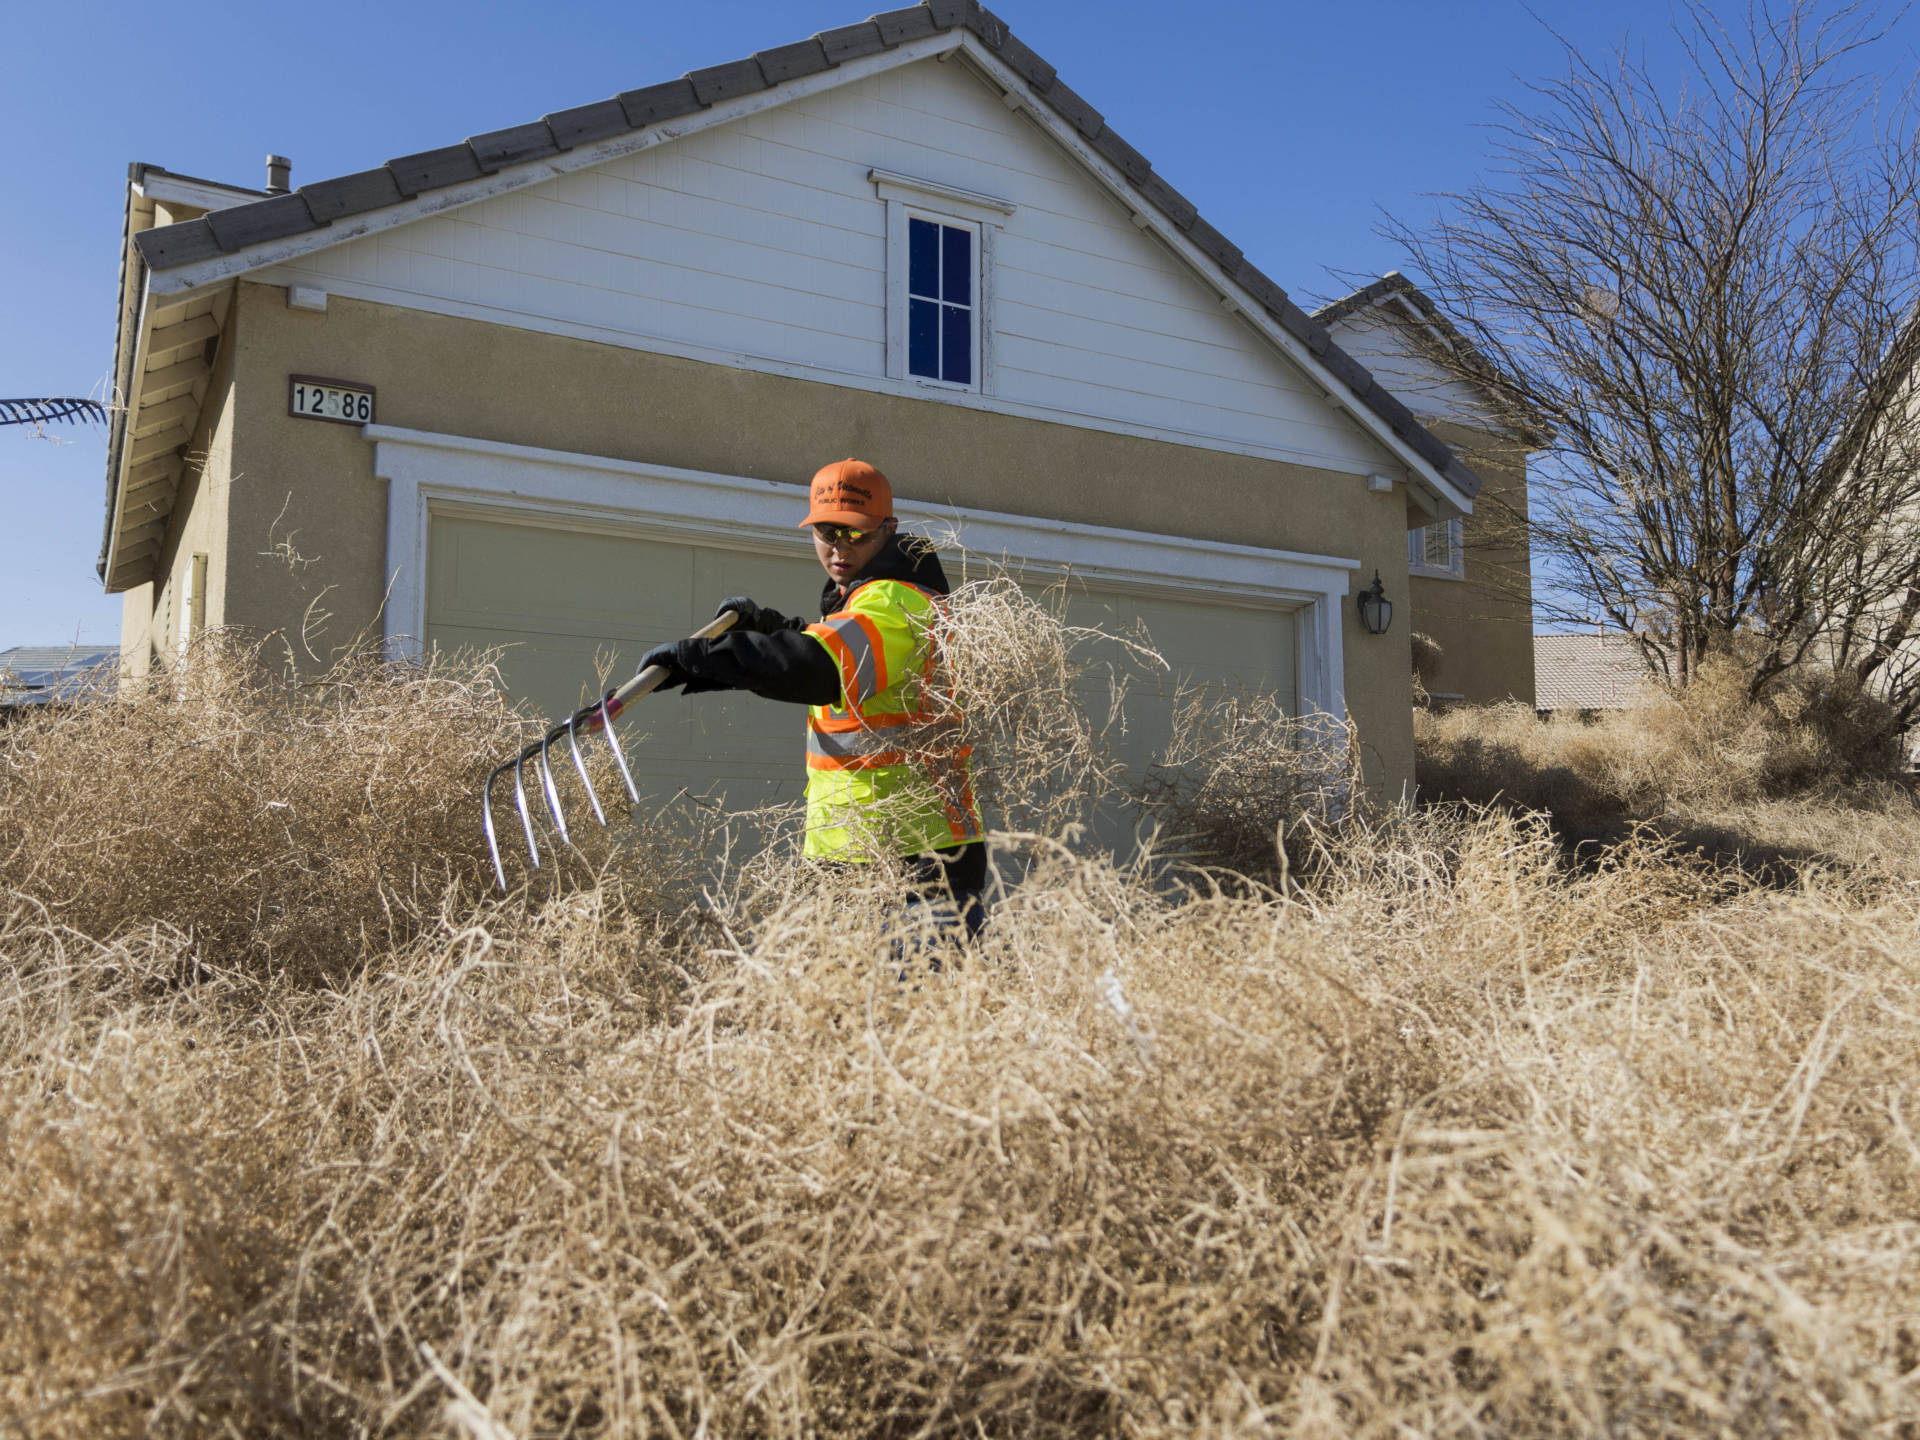 A member of the Victorville public works team clears tumbleweeds from homes on Monday. James Quigg/The Daily Press via AP